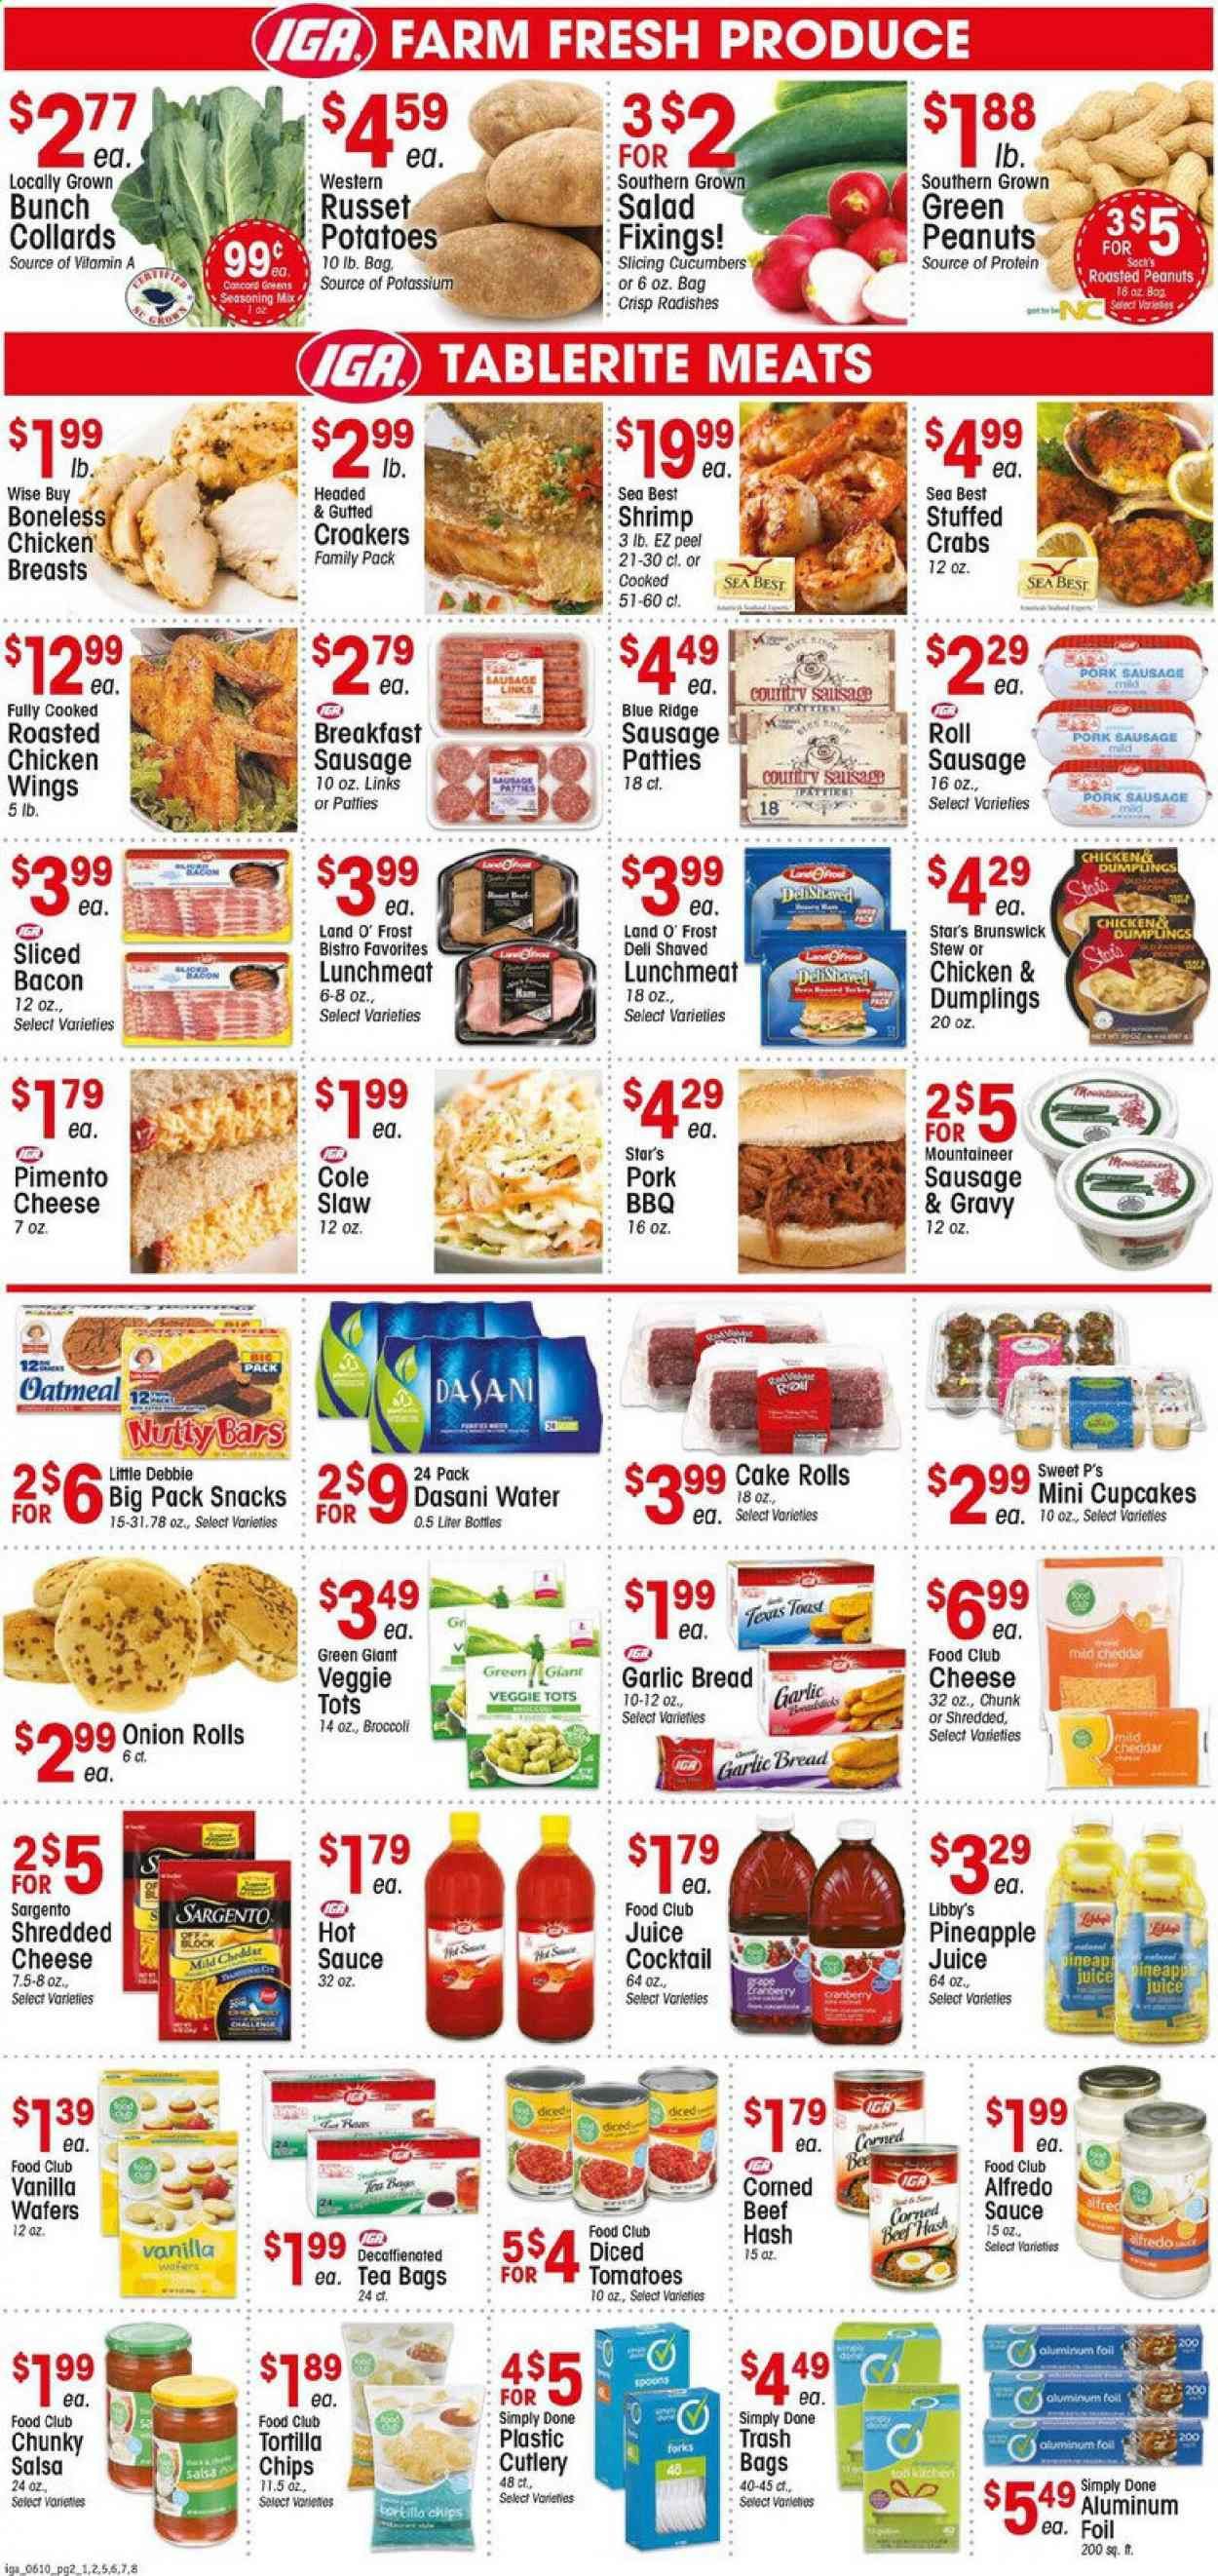 KJ´s Market Weekly Ad & Flyer June 10 to 16